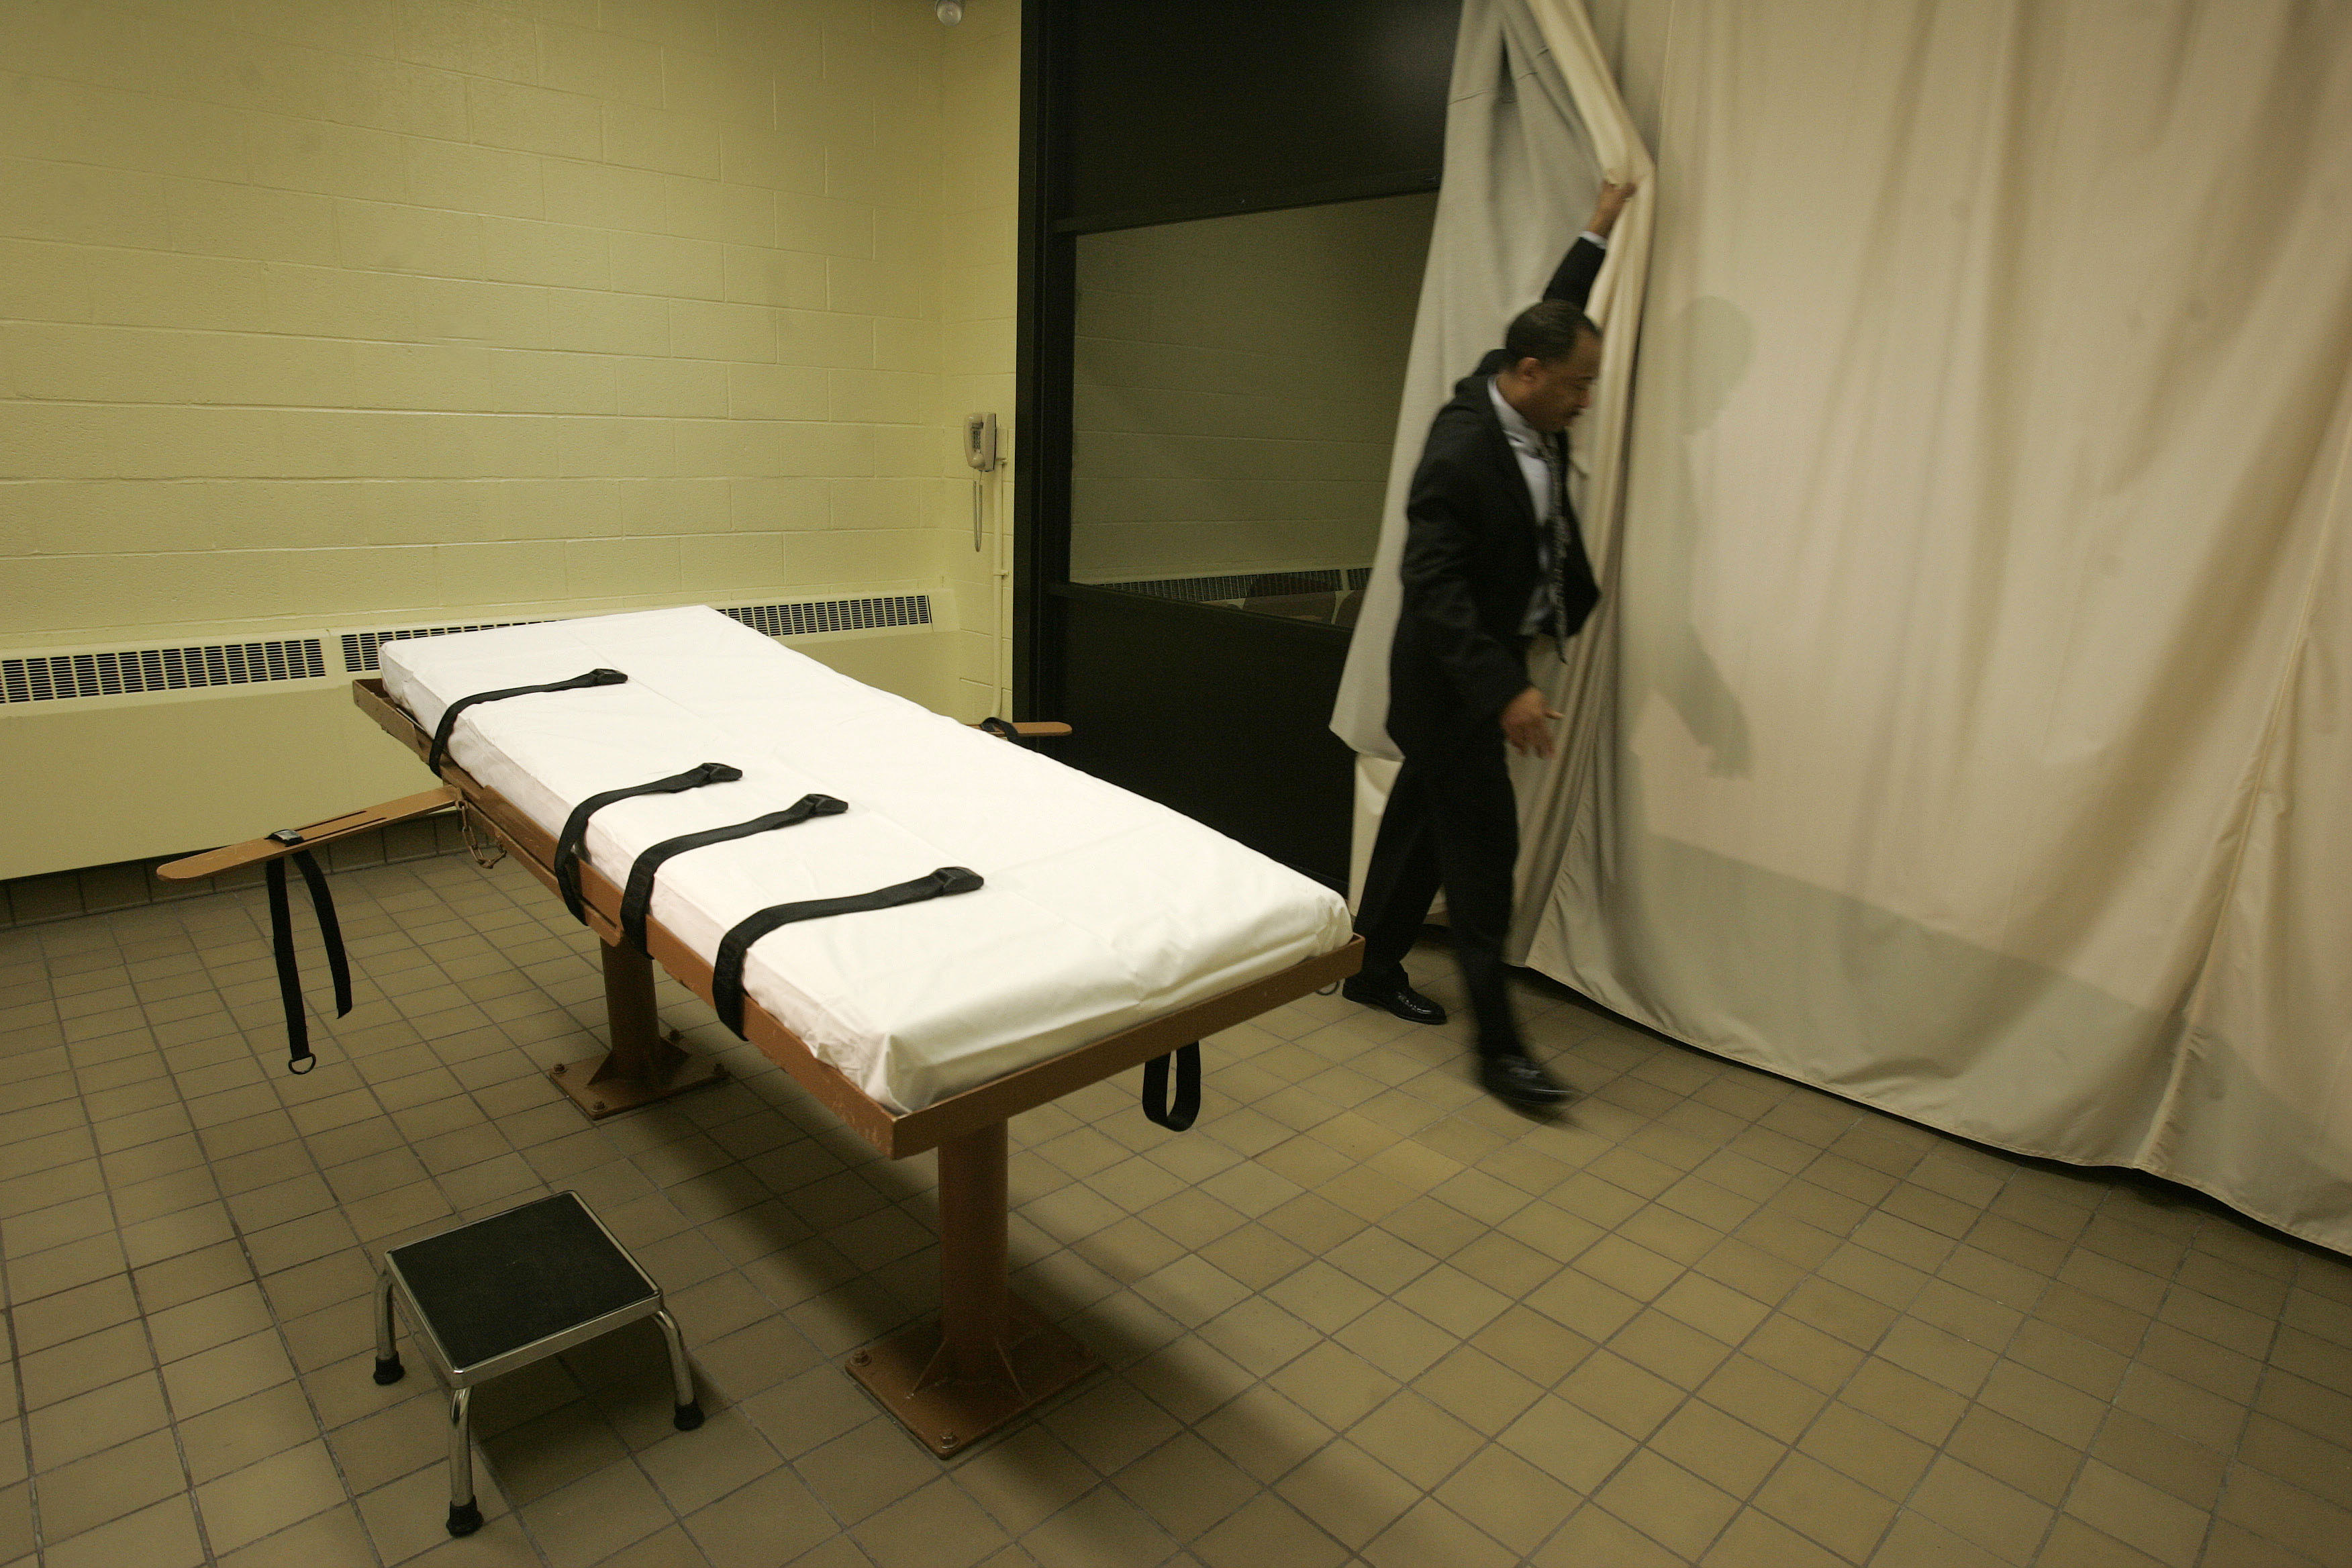 Ohio legislators are looking to shield the identity of drugmakers for lethal injections, which are performed in the execution chamber in the Southern Ohio Correctional Facility in Lucasville, Ohio. (Kiichiro Sato—Associated Press)